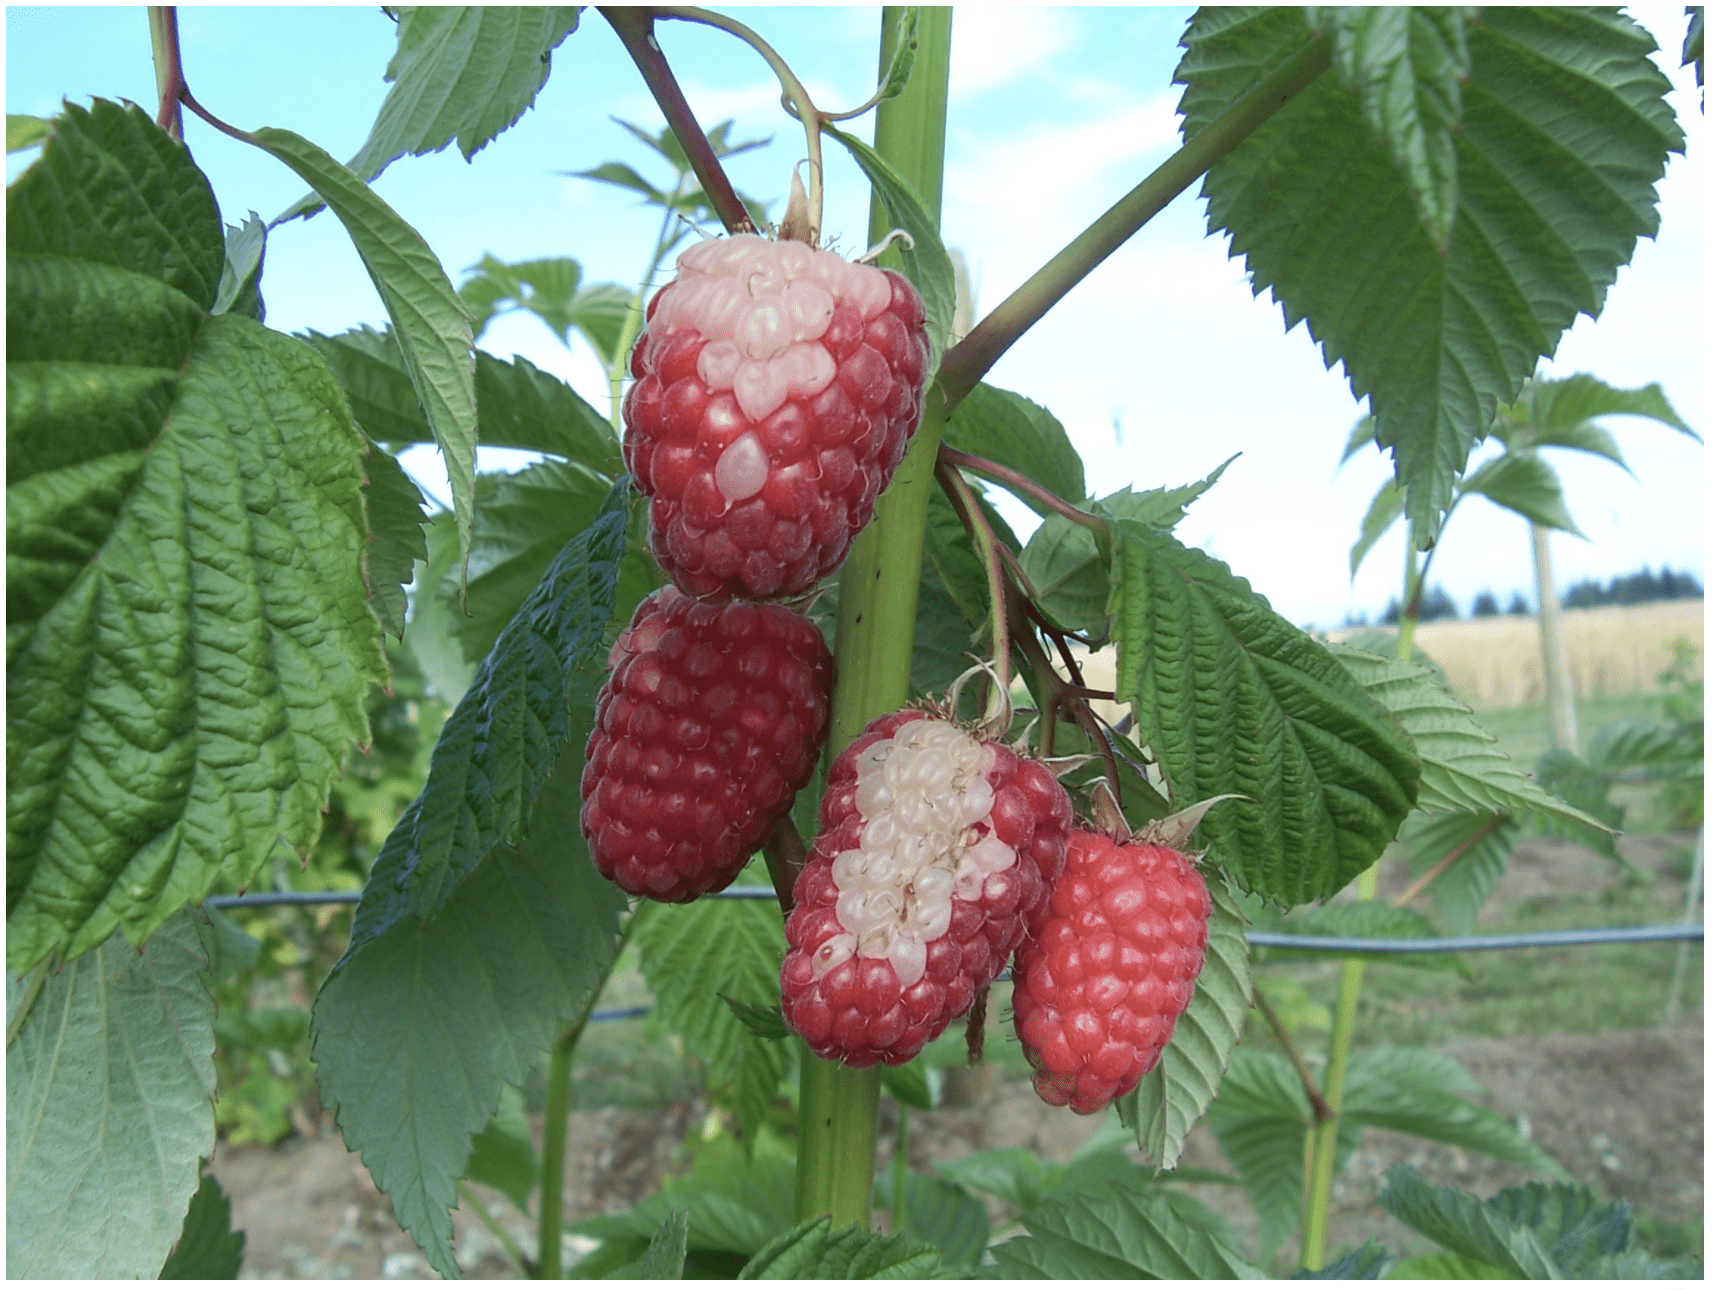 berries with sections of white drupelets